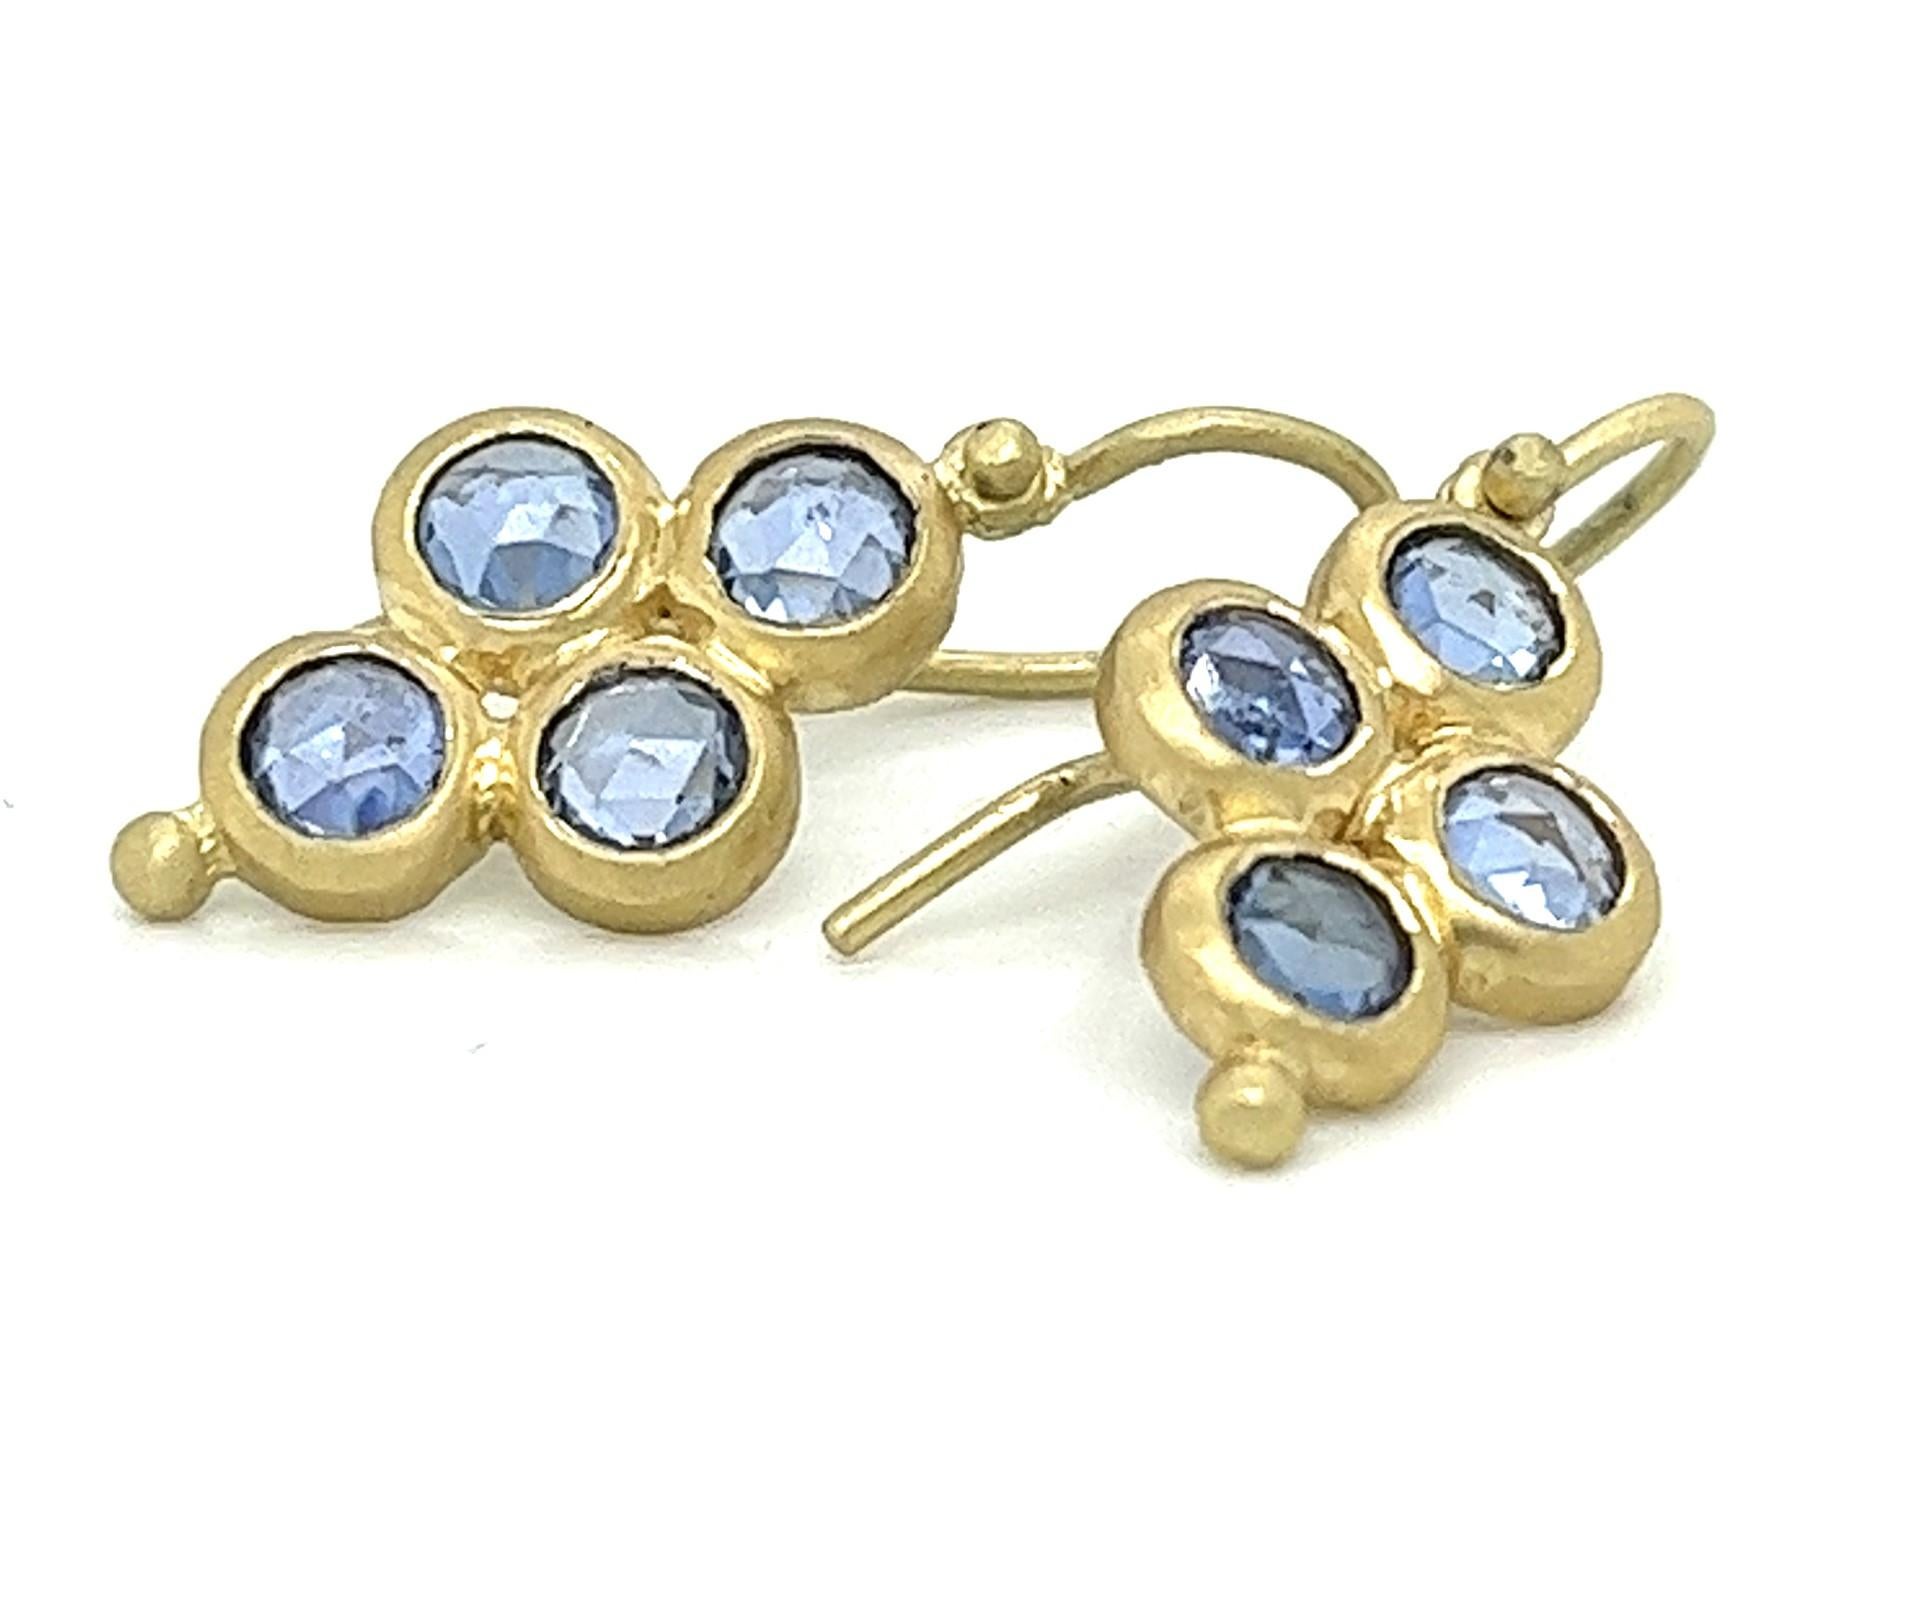 Faye Kim's Blue Sapphire Rose Cut Hinged Quad Drop Earrings are handcrafted in 18 karat gold. The quad design with hinged ear wires and a gold bead at the base is bright and lively with movement. The perfect diamond drop earrings, lightweight and